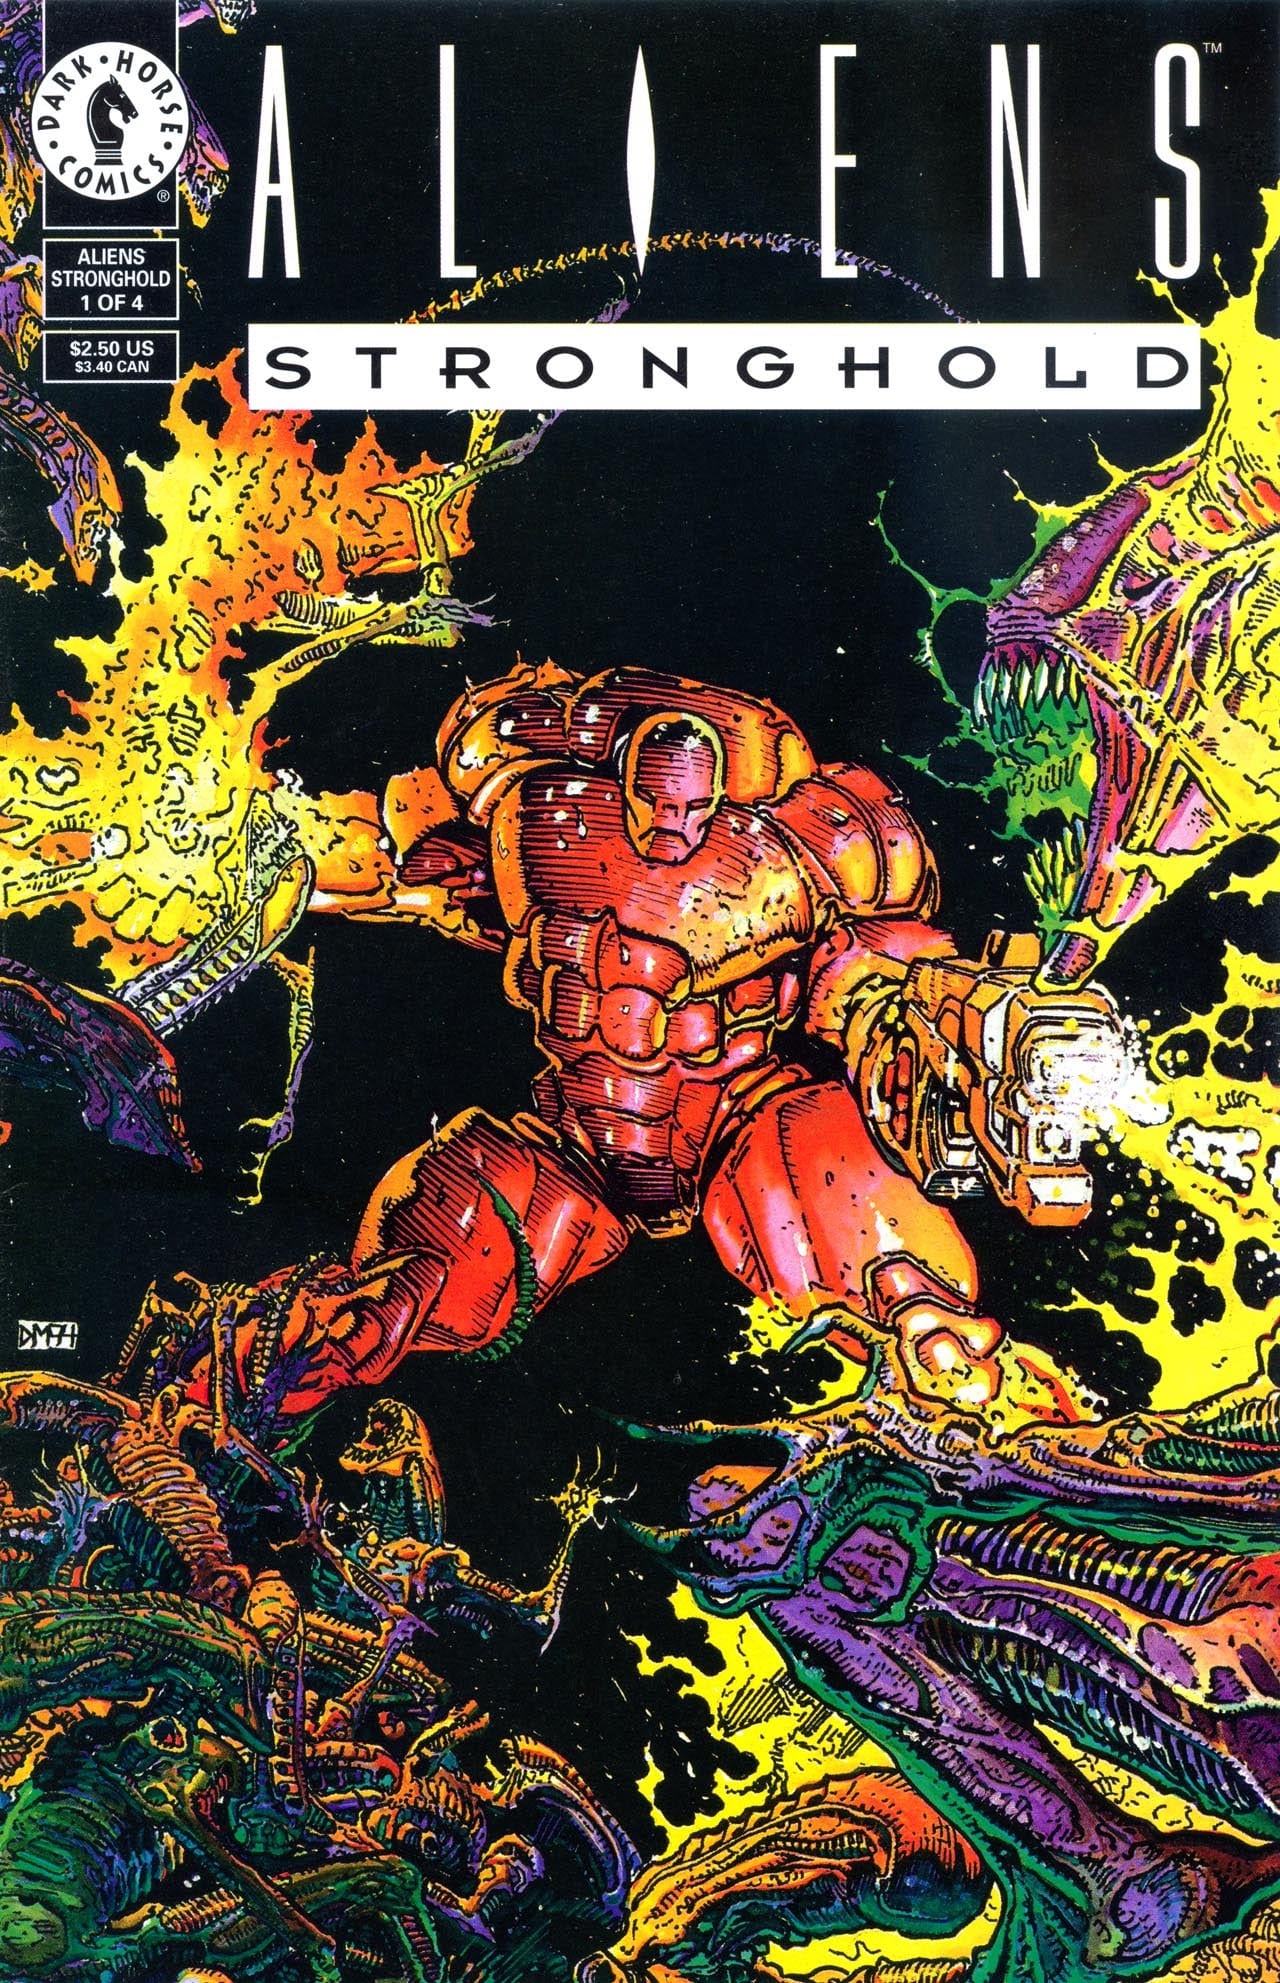 Comic completo Aliens: Stronghold